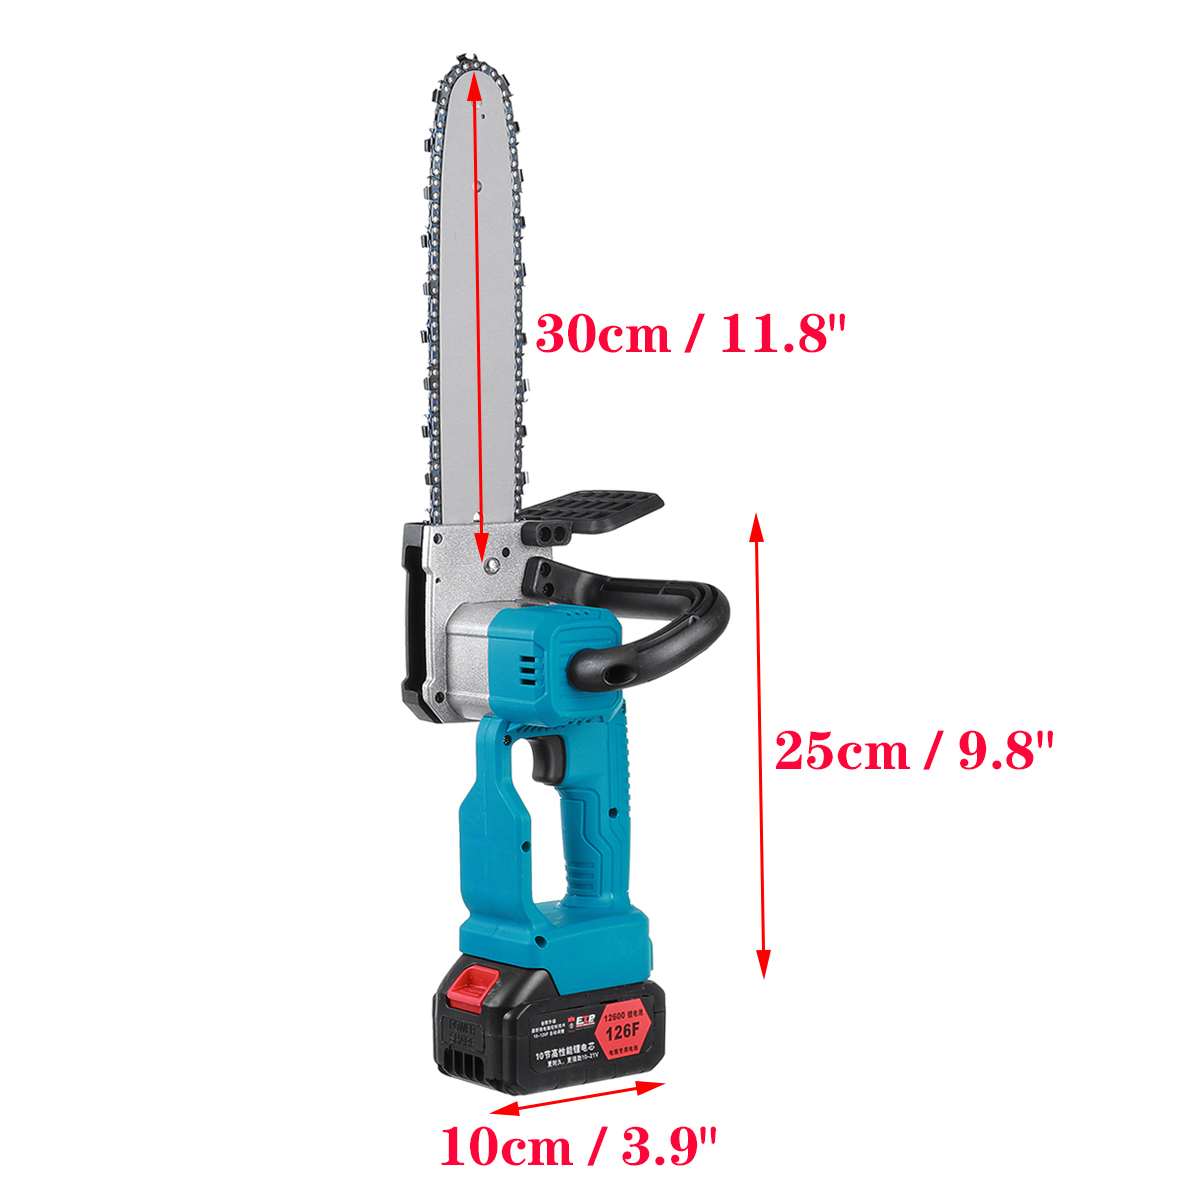 21V-10-Inch-Cordless-Electric-Chain-Saw-Wood-Mini-Cutter-One-Hand-Saw-Woodworking-Tool-1809052-13